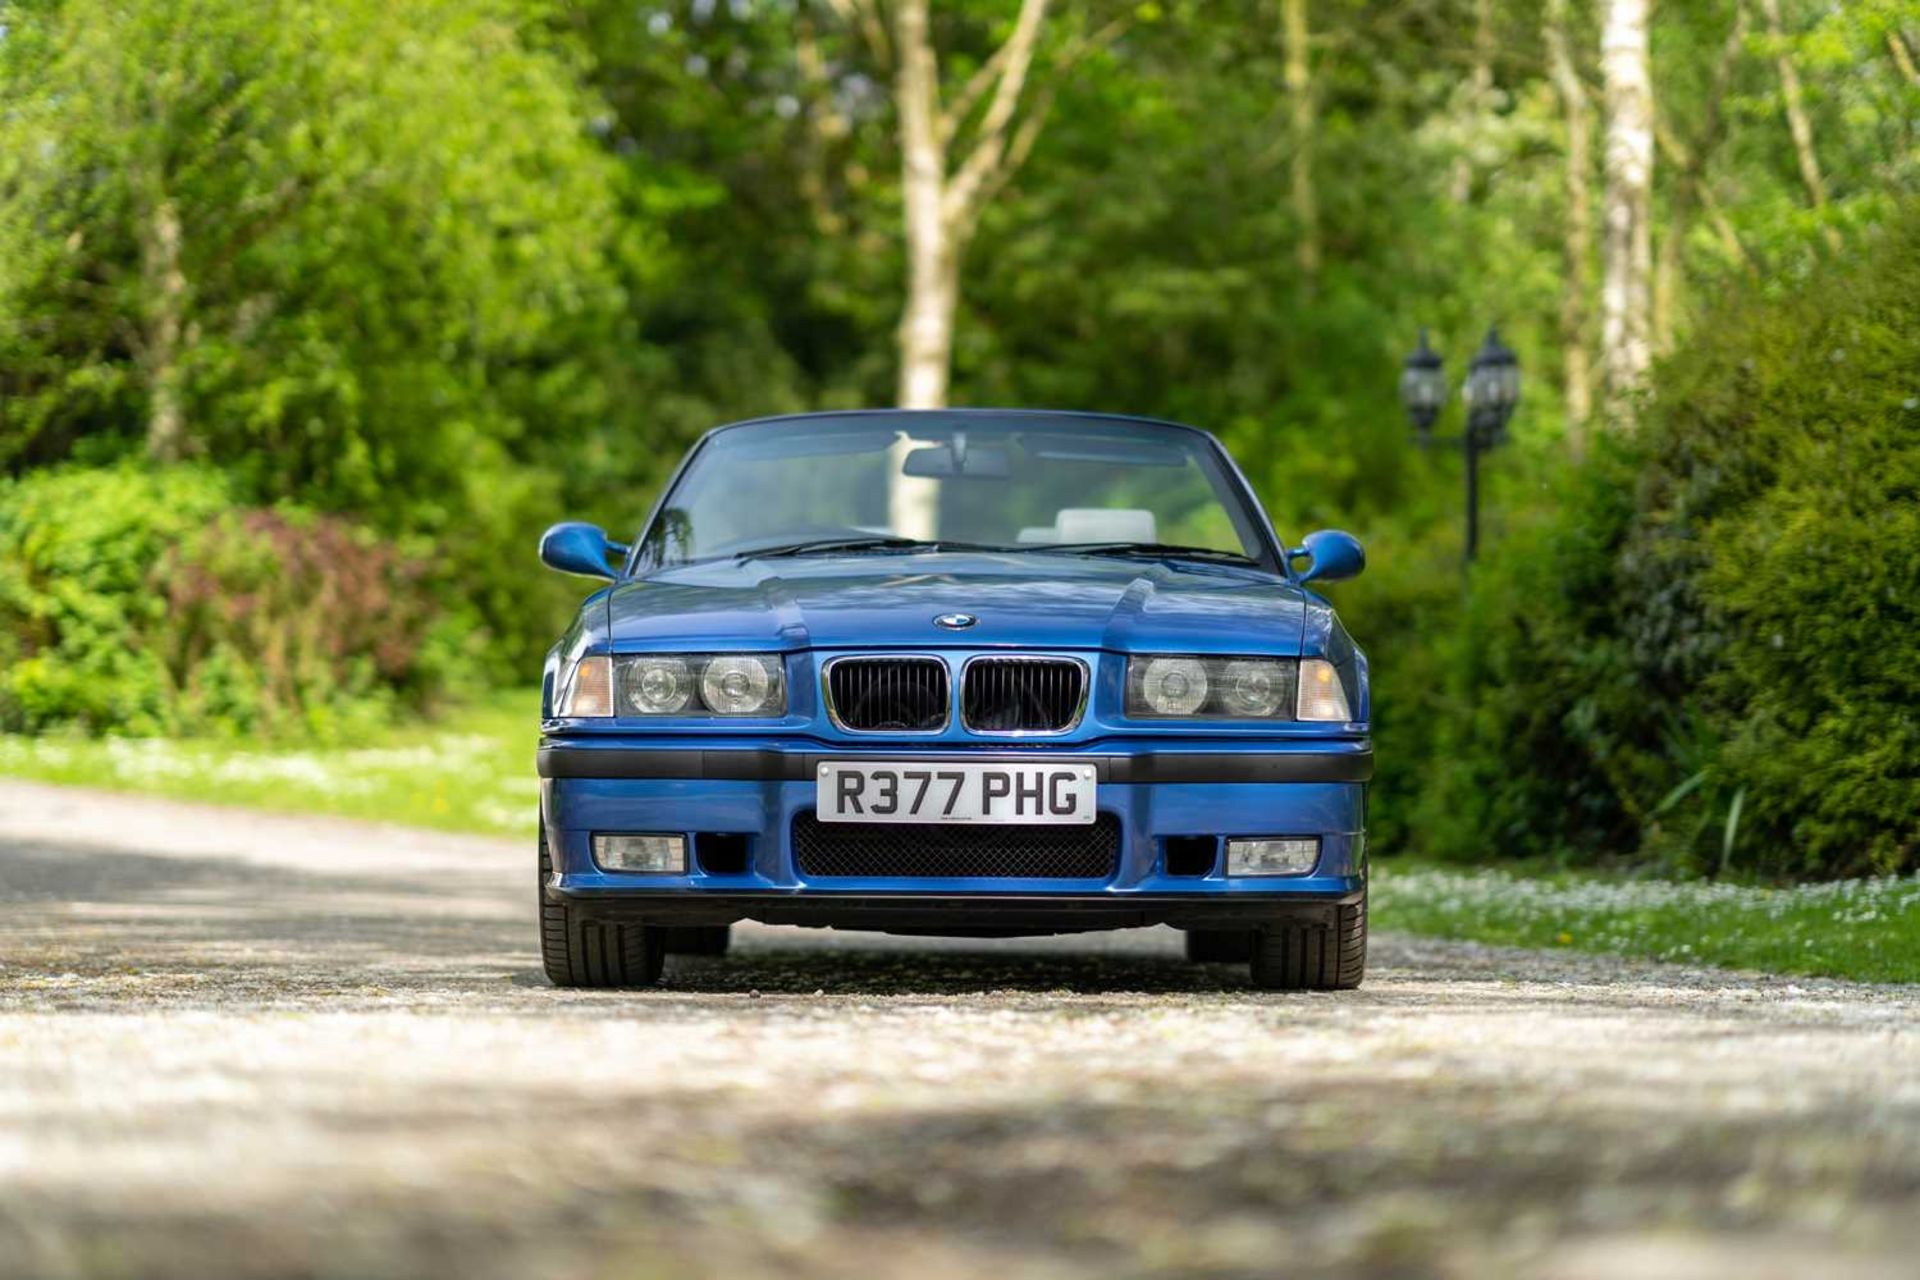 1998 BMW M3 Evolution Convertible Only 54,000 miles and full service history - Image 75 of 89